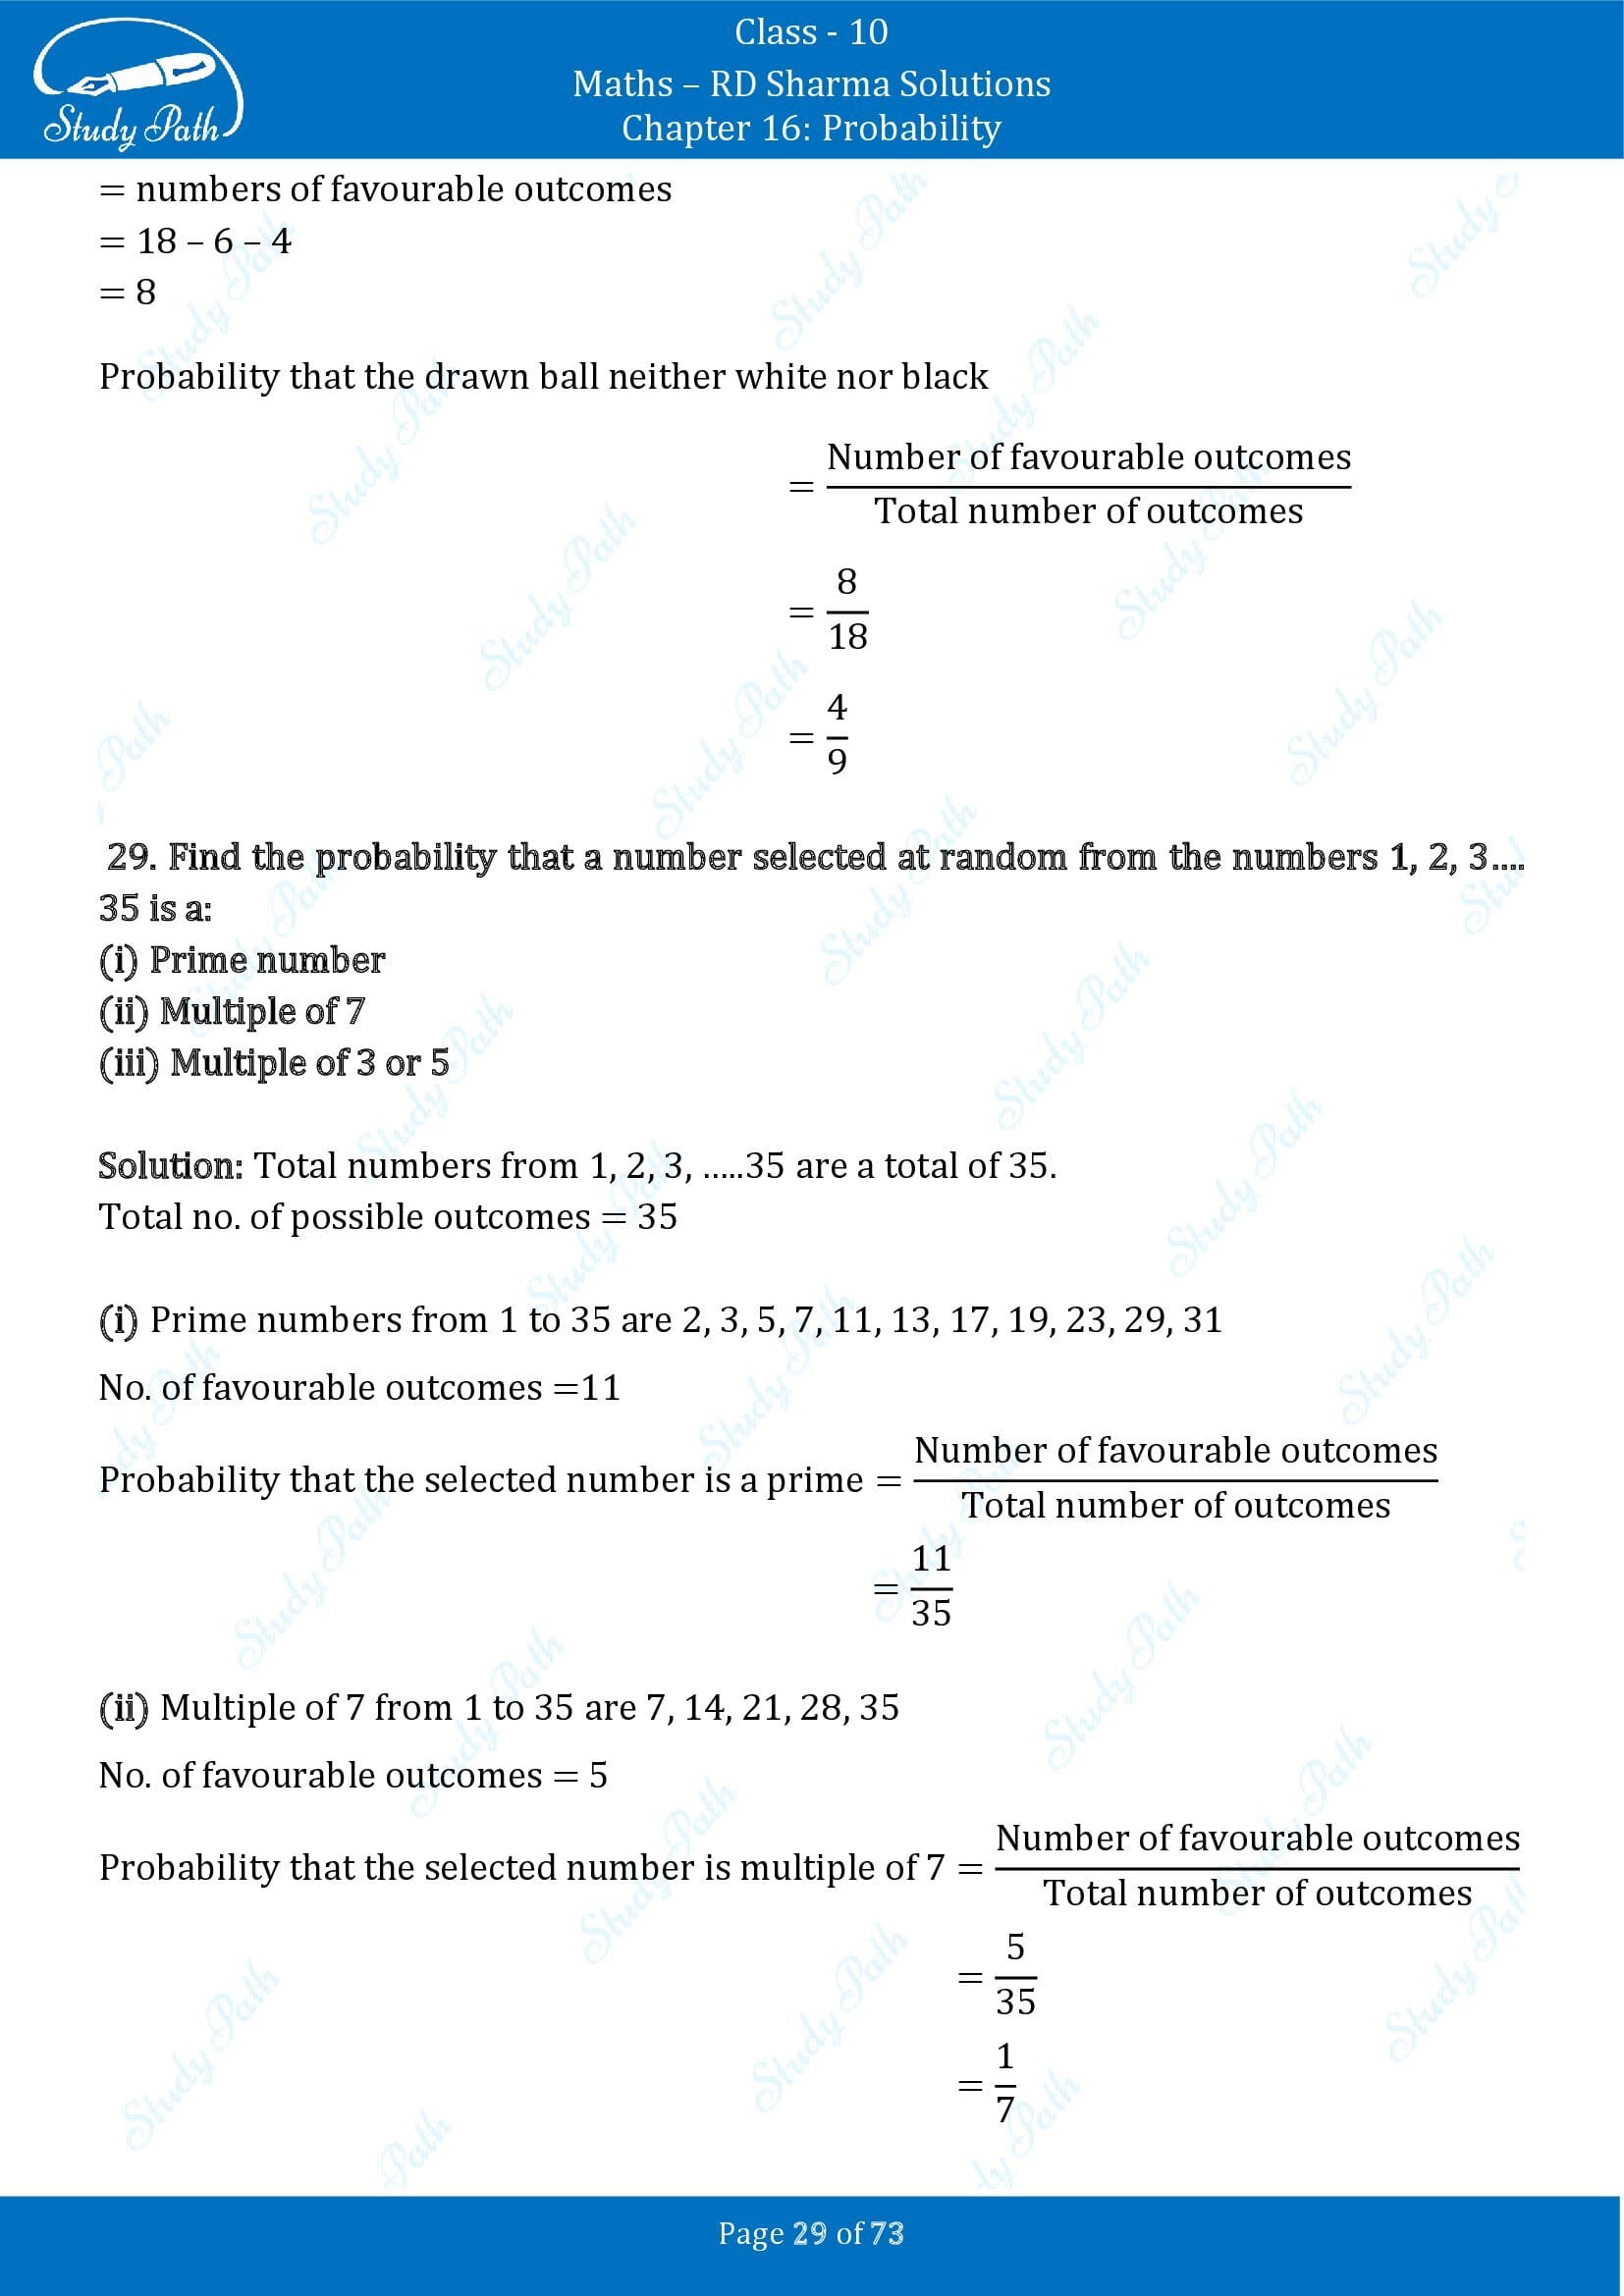 RD Sharma Solutions Class 10 Chapter 16 Probability Exercise 16.1 00029